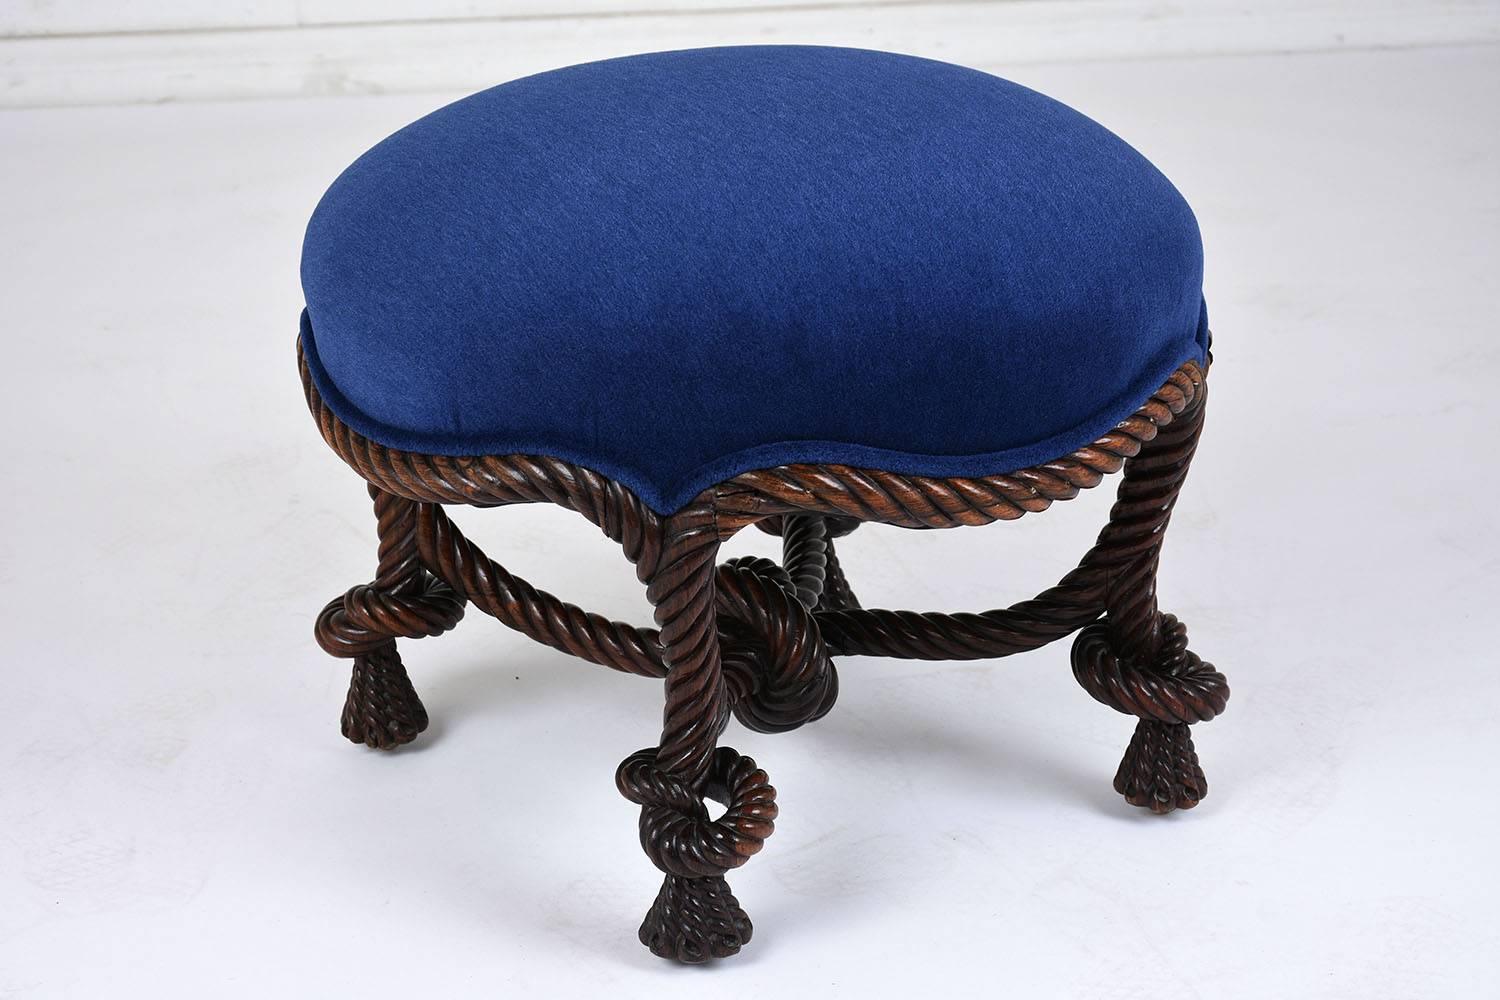 This 1850's Louis XVI-style ottoman or foot stool features a walnut wood frame stained in a deep walnut color. The frame is adorned with stunning braided rope carvings. The stool has recently been professionally upholstered in a royal blue mohair